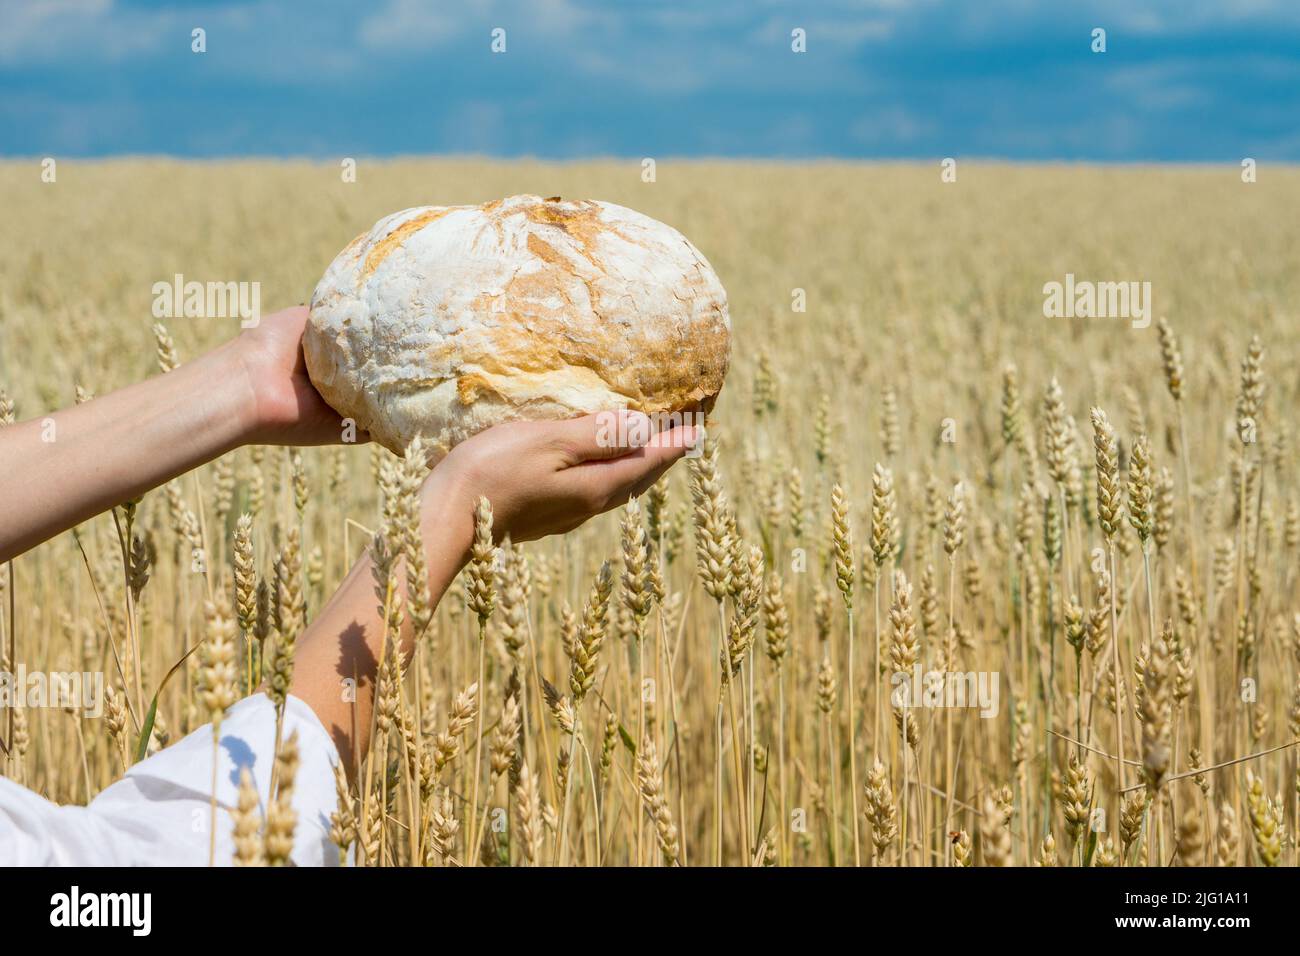 Female hands holding home baked bread loaf above ripe wheat field. World food security concept. Stock Photo